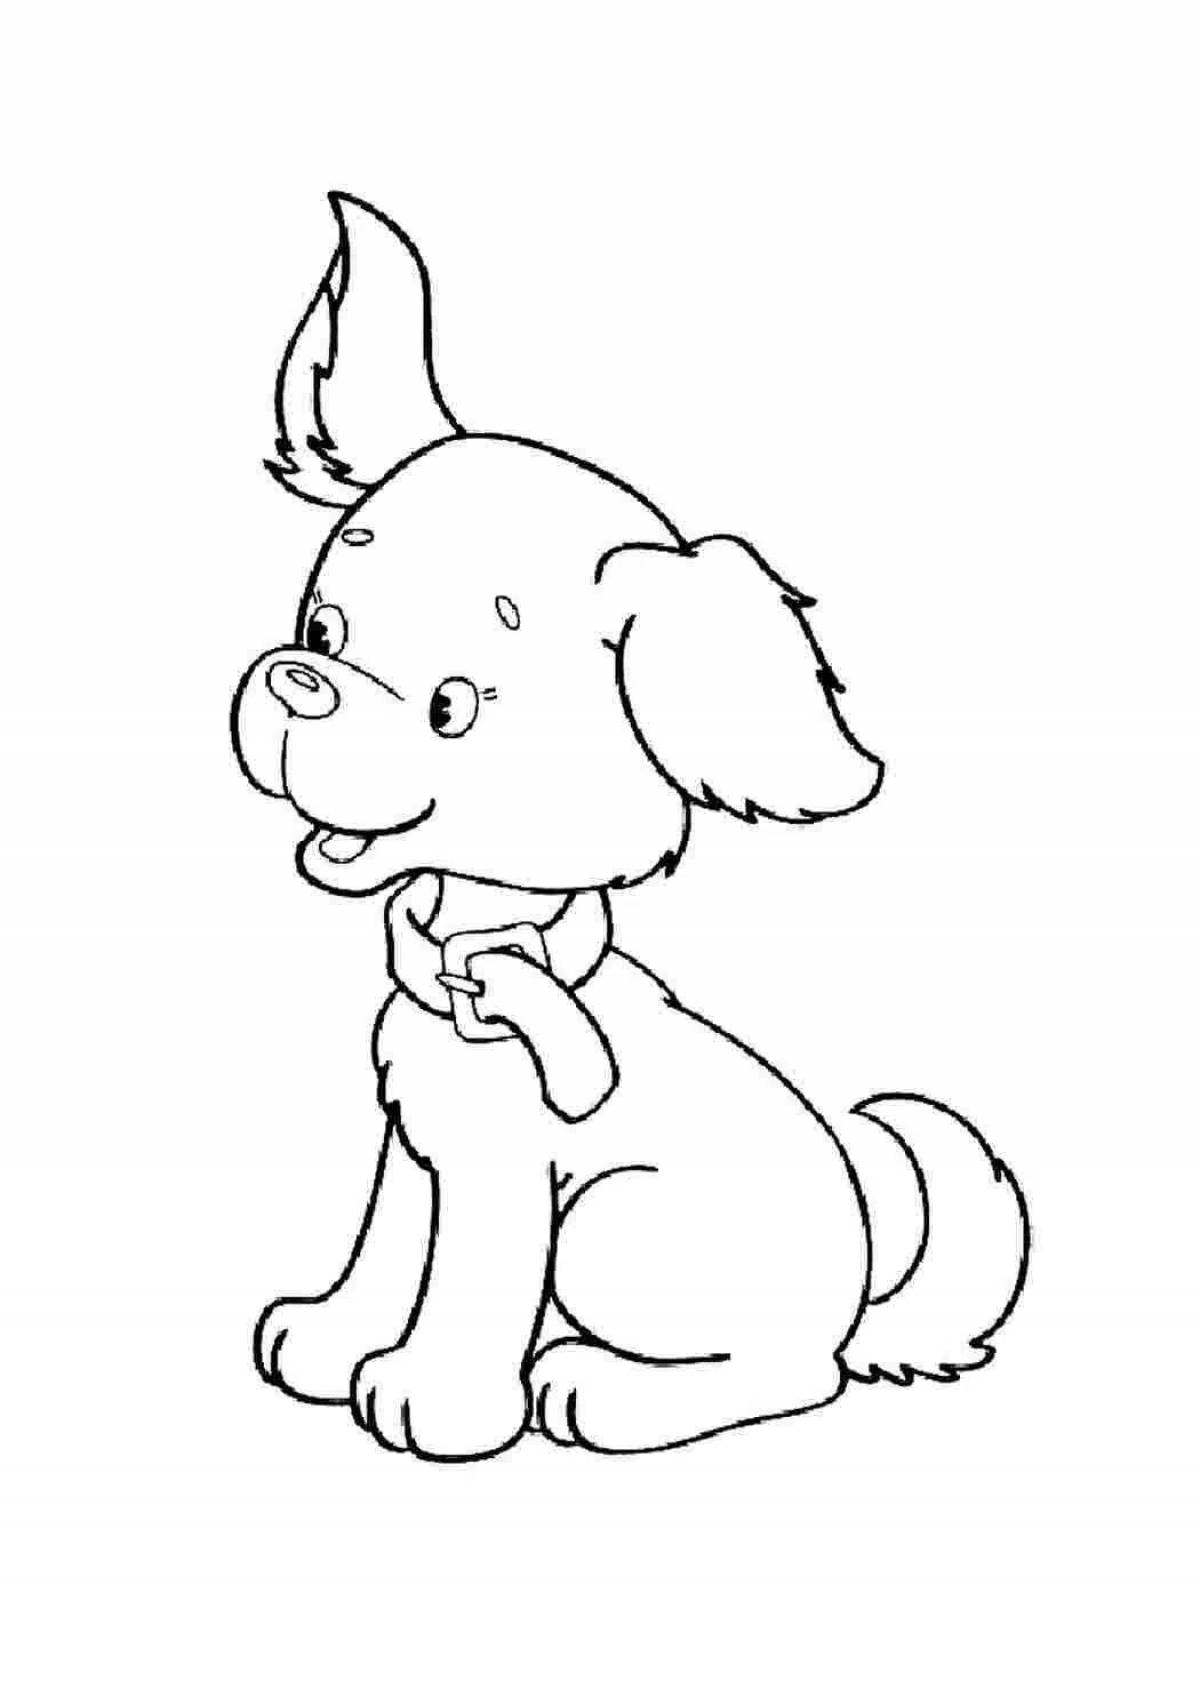 Wagging coloring picture of a puppy